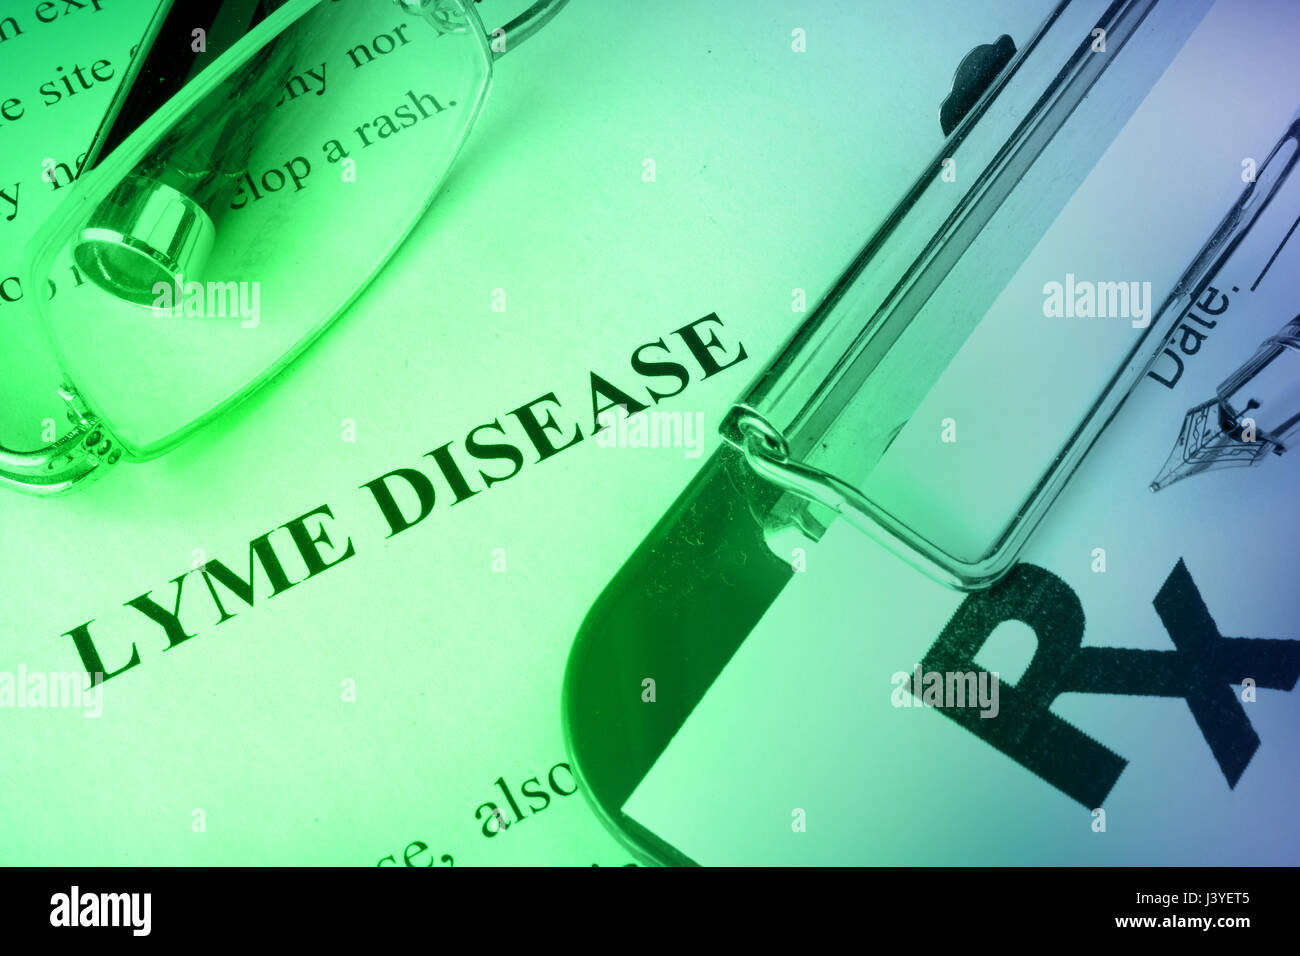 Diagnosis Lyme disease written on a page. Medical concept. Stock Photo